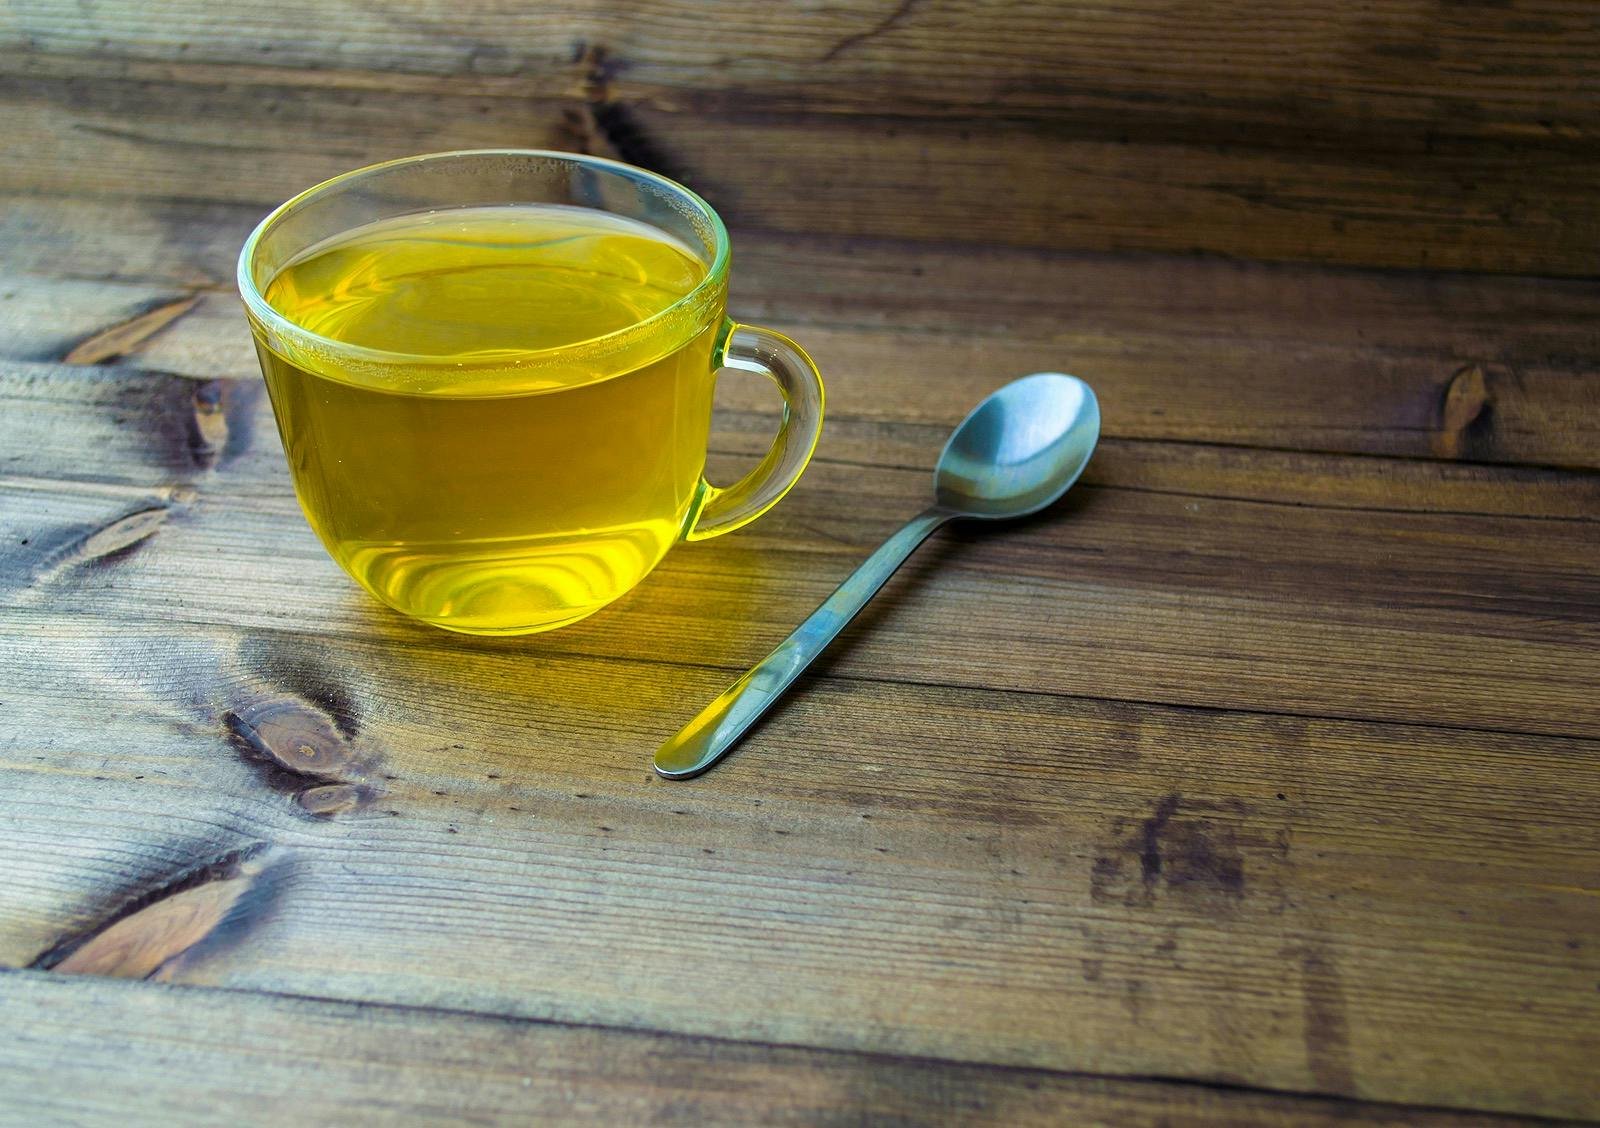 heating a metal spoon in a hot cup of green tea and applying it to the skin can ease itchy bug bites